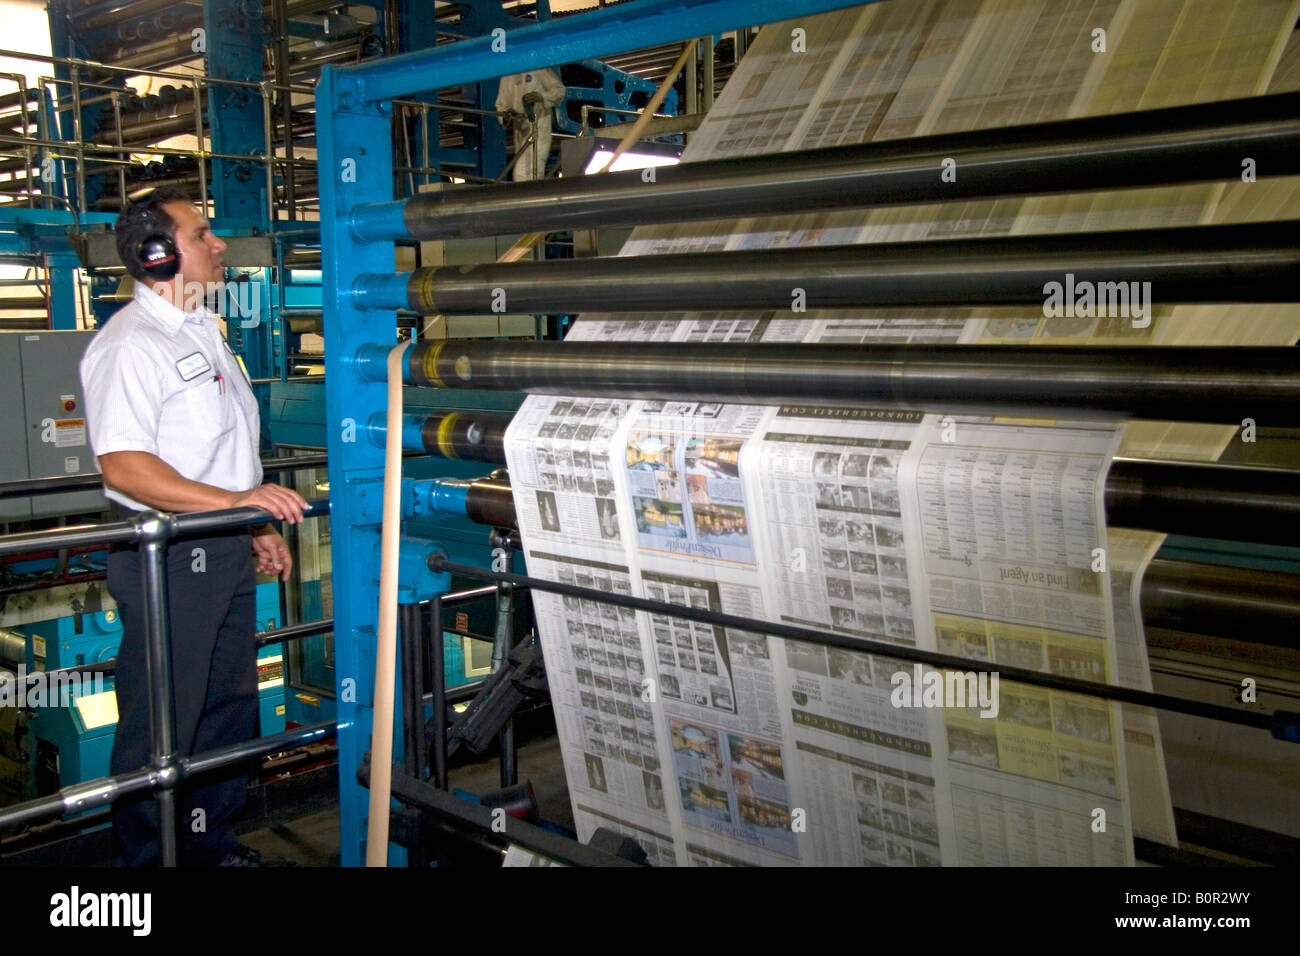 Newspaper being printed on a rotary printing press for the Houston Chronicle in Houston Texas Stock Photo